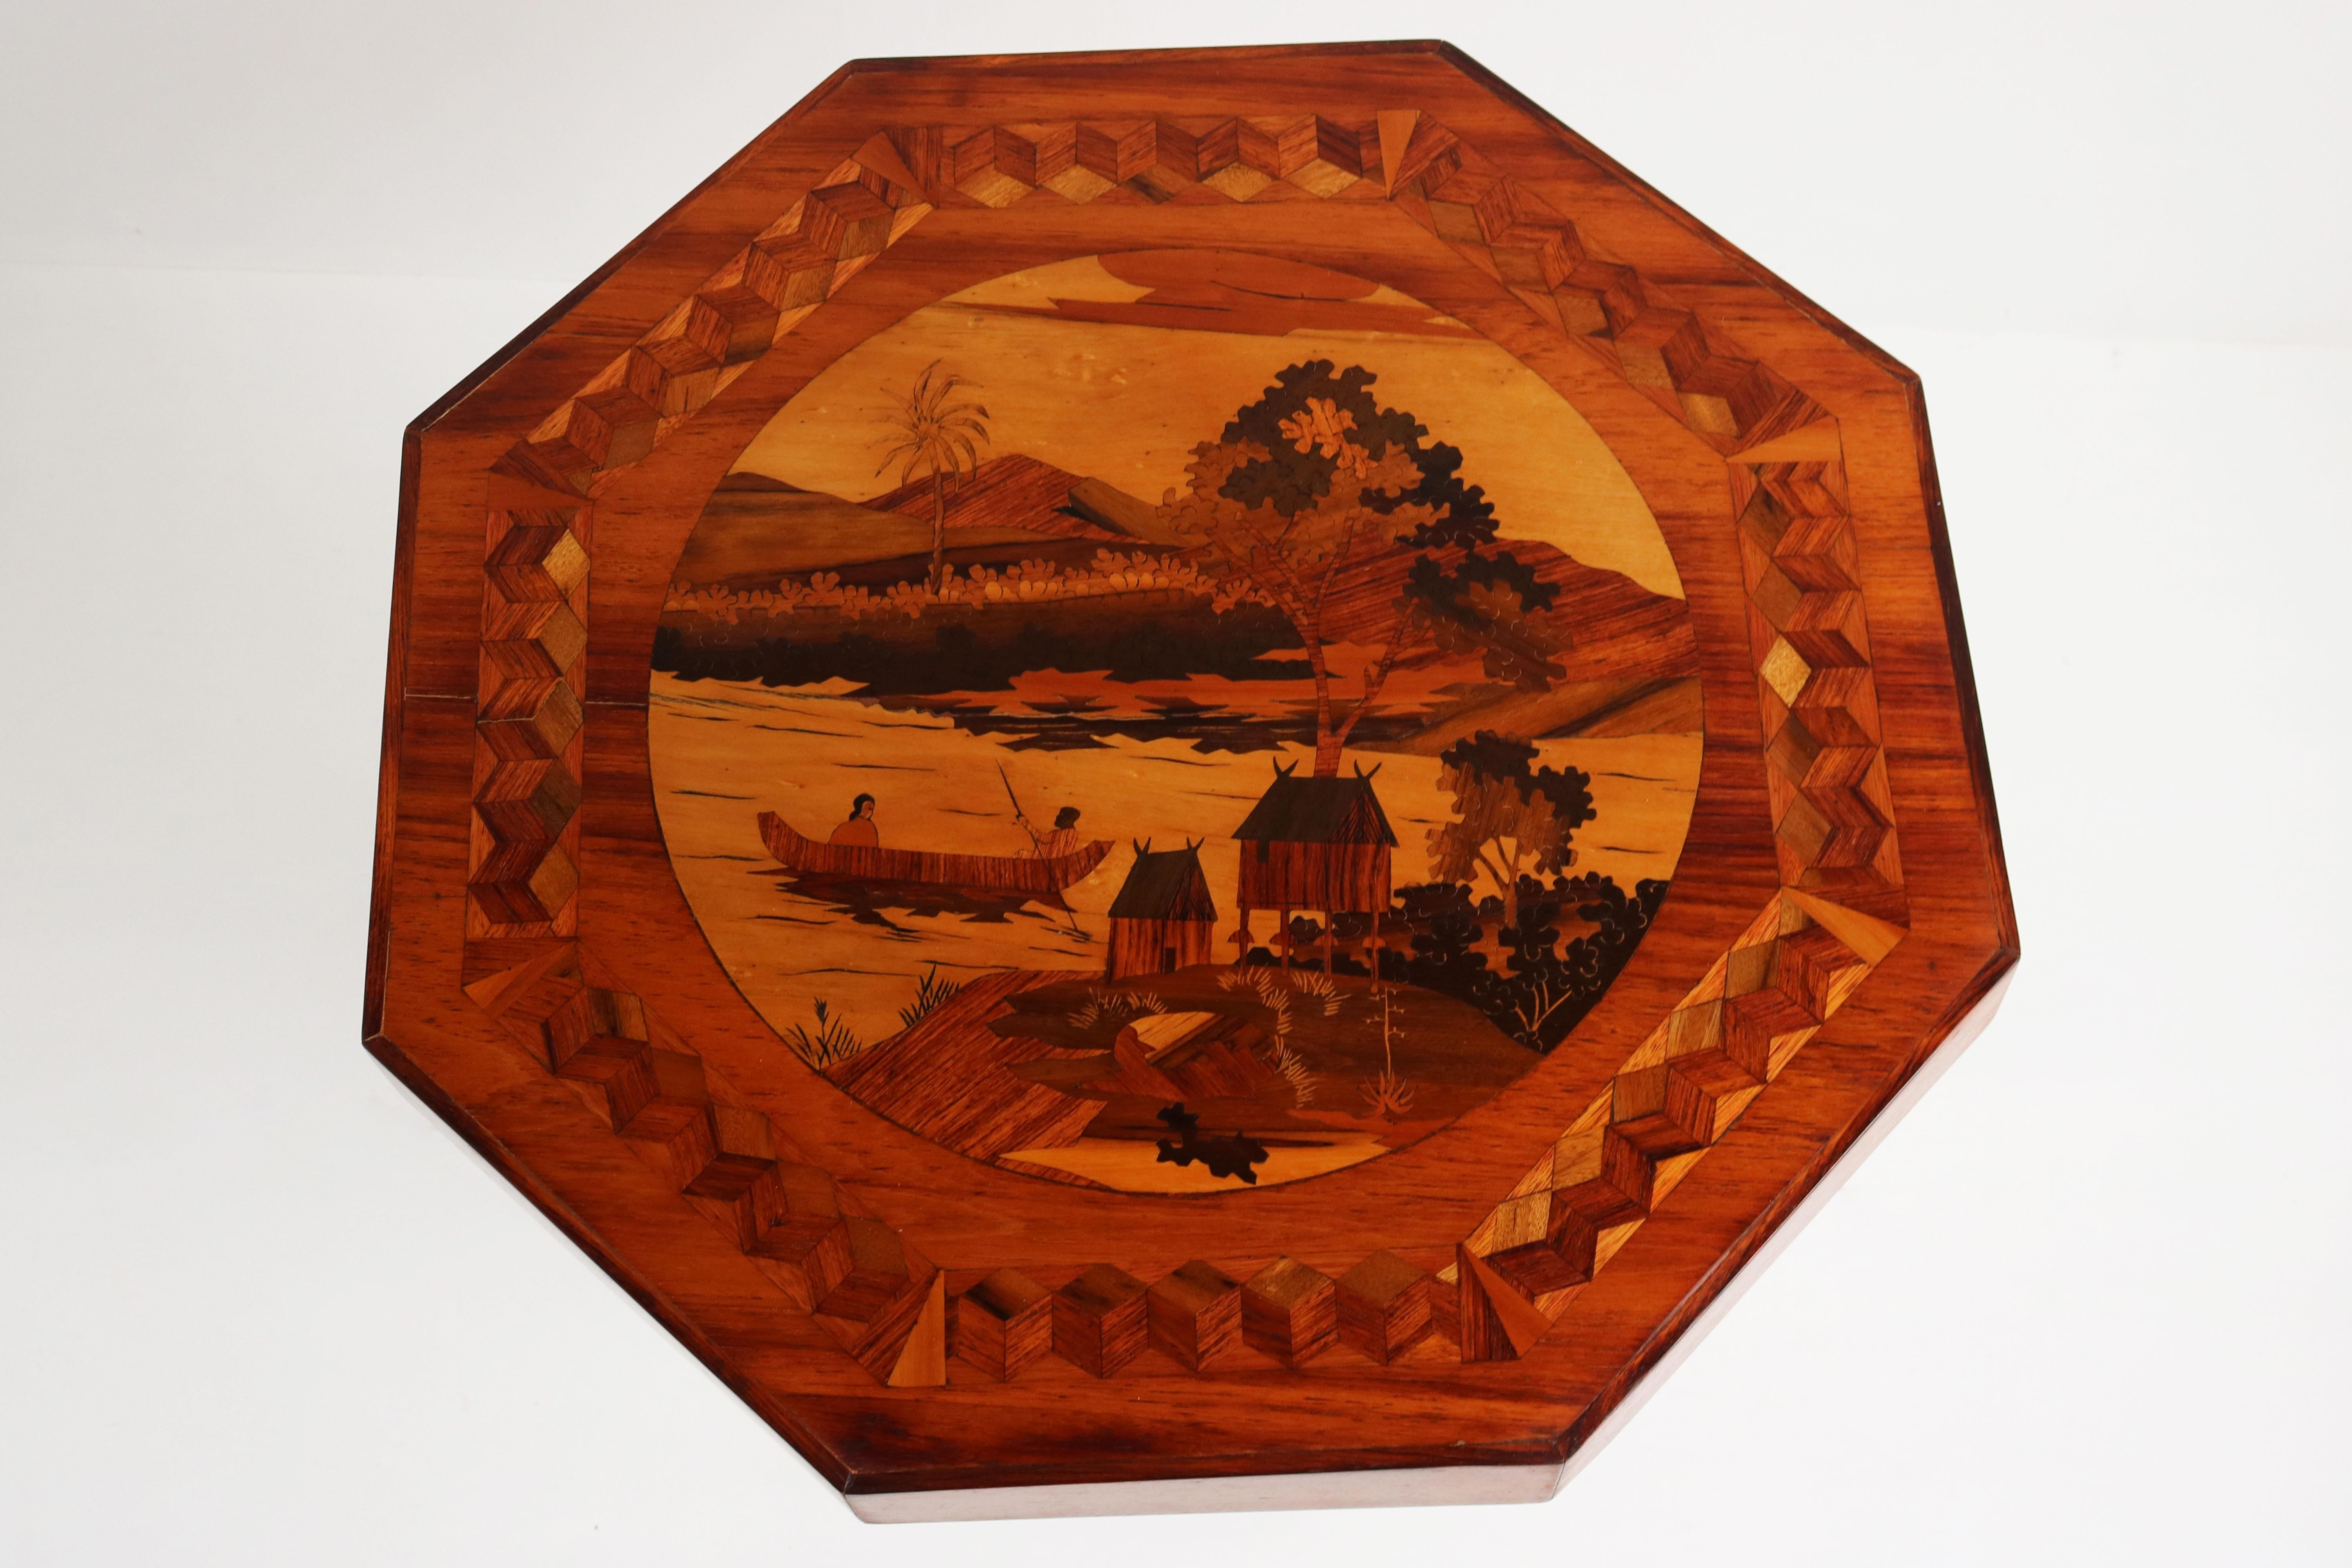 Marvelous French Art Deco octagonal table with superb Inlay 1930. 
This rare Art Deco piece is a stunning display of craftsmanship with numerous inlay decorations and period typical Octagonal shape. 
The table top displays an Oriental scenery very